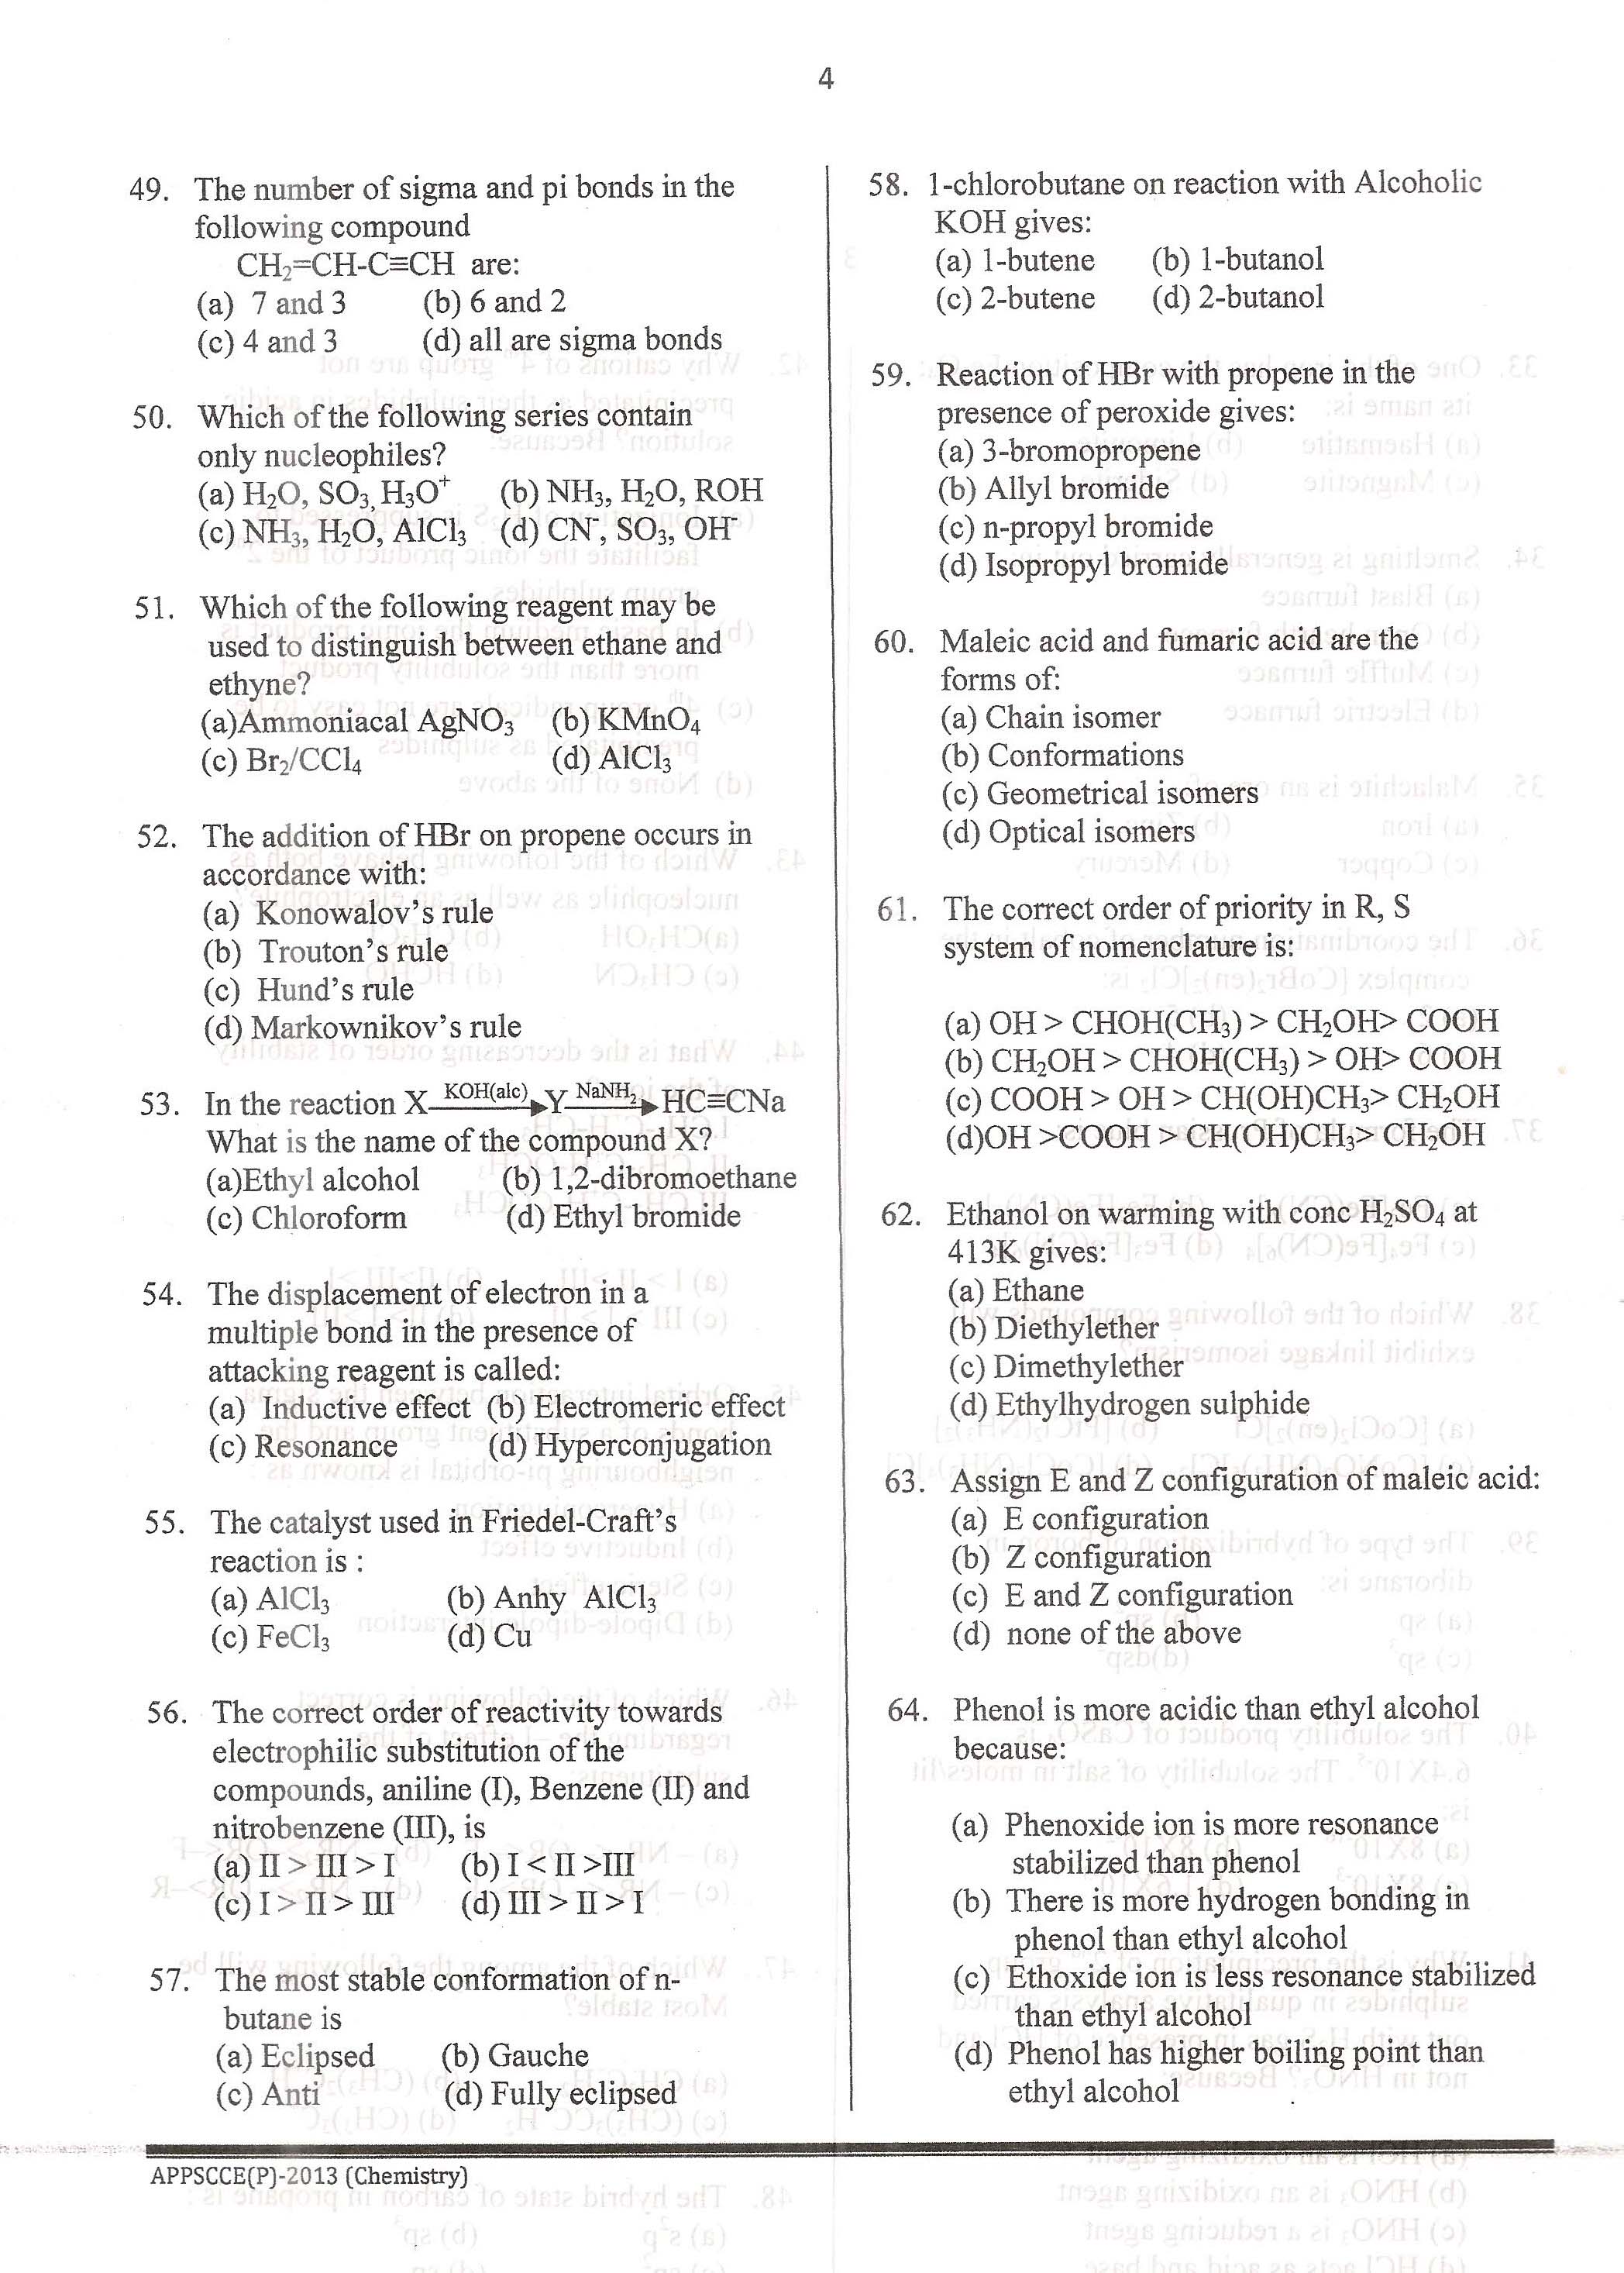 APPSC Combined Competitive Prelims Exam 2013 Chemistry 5